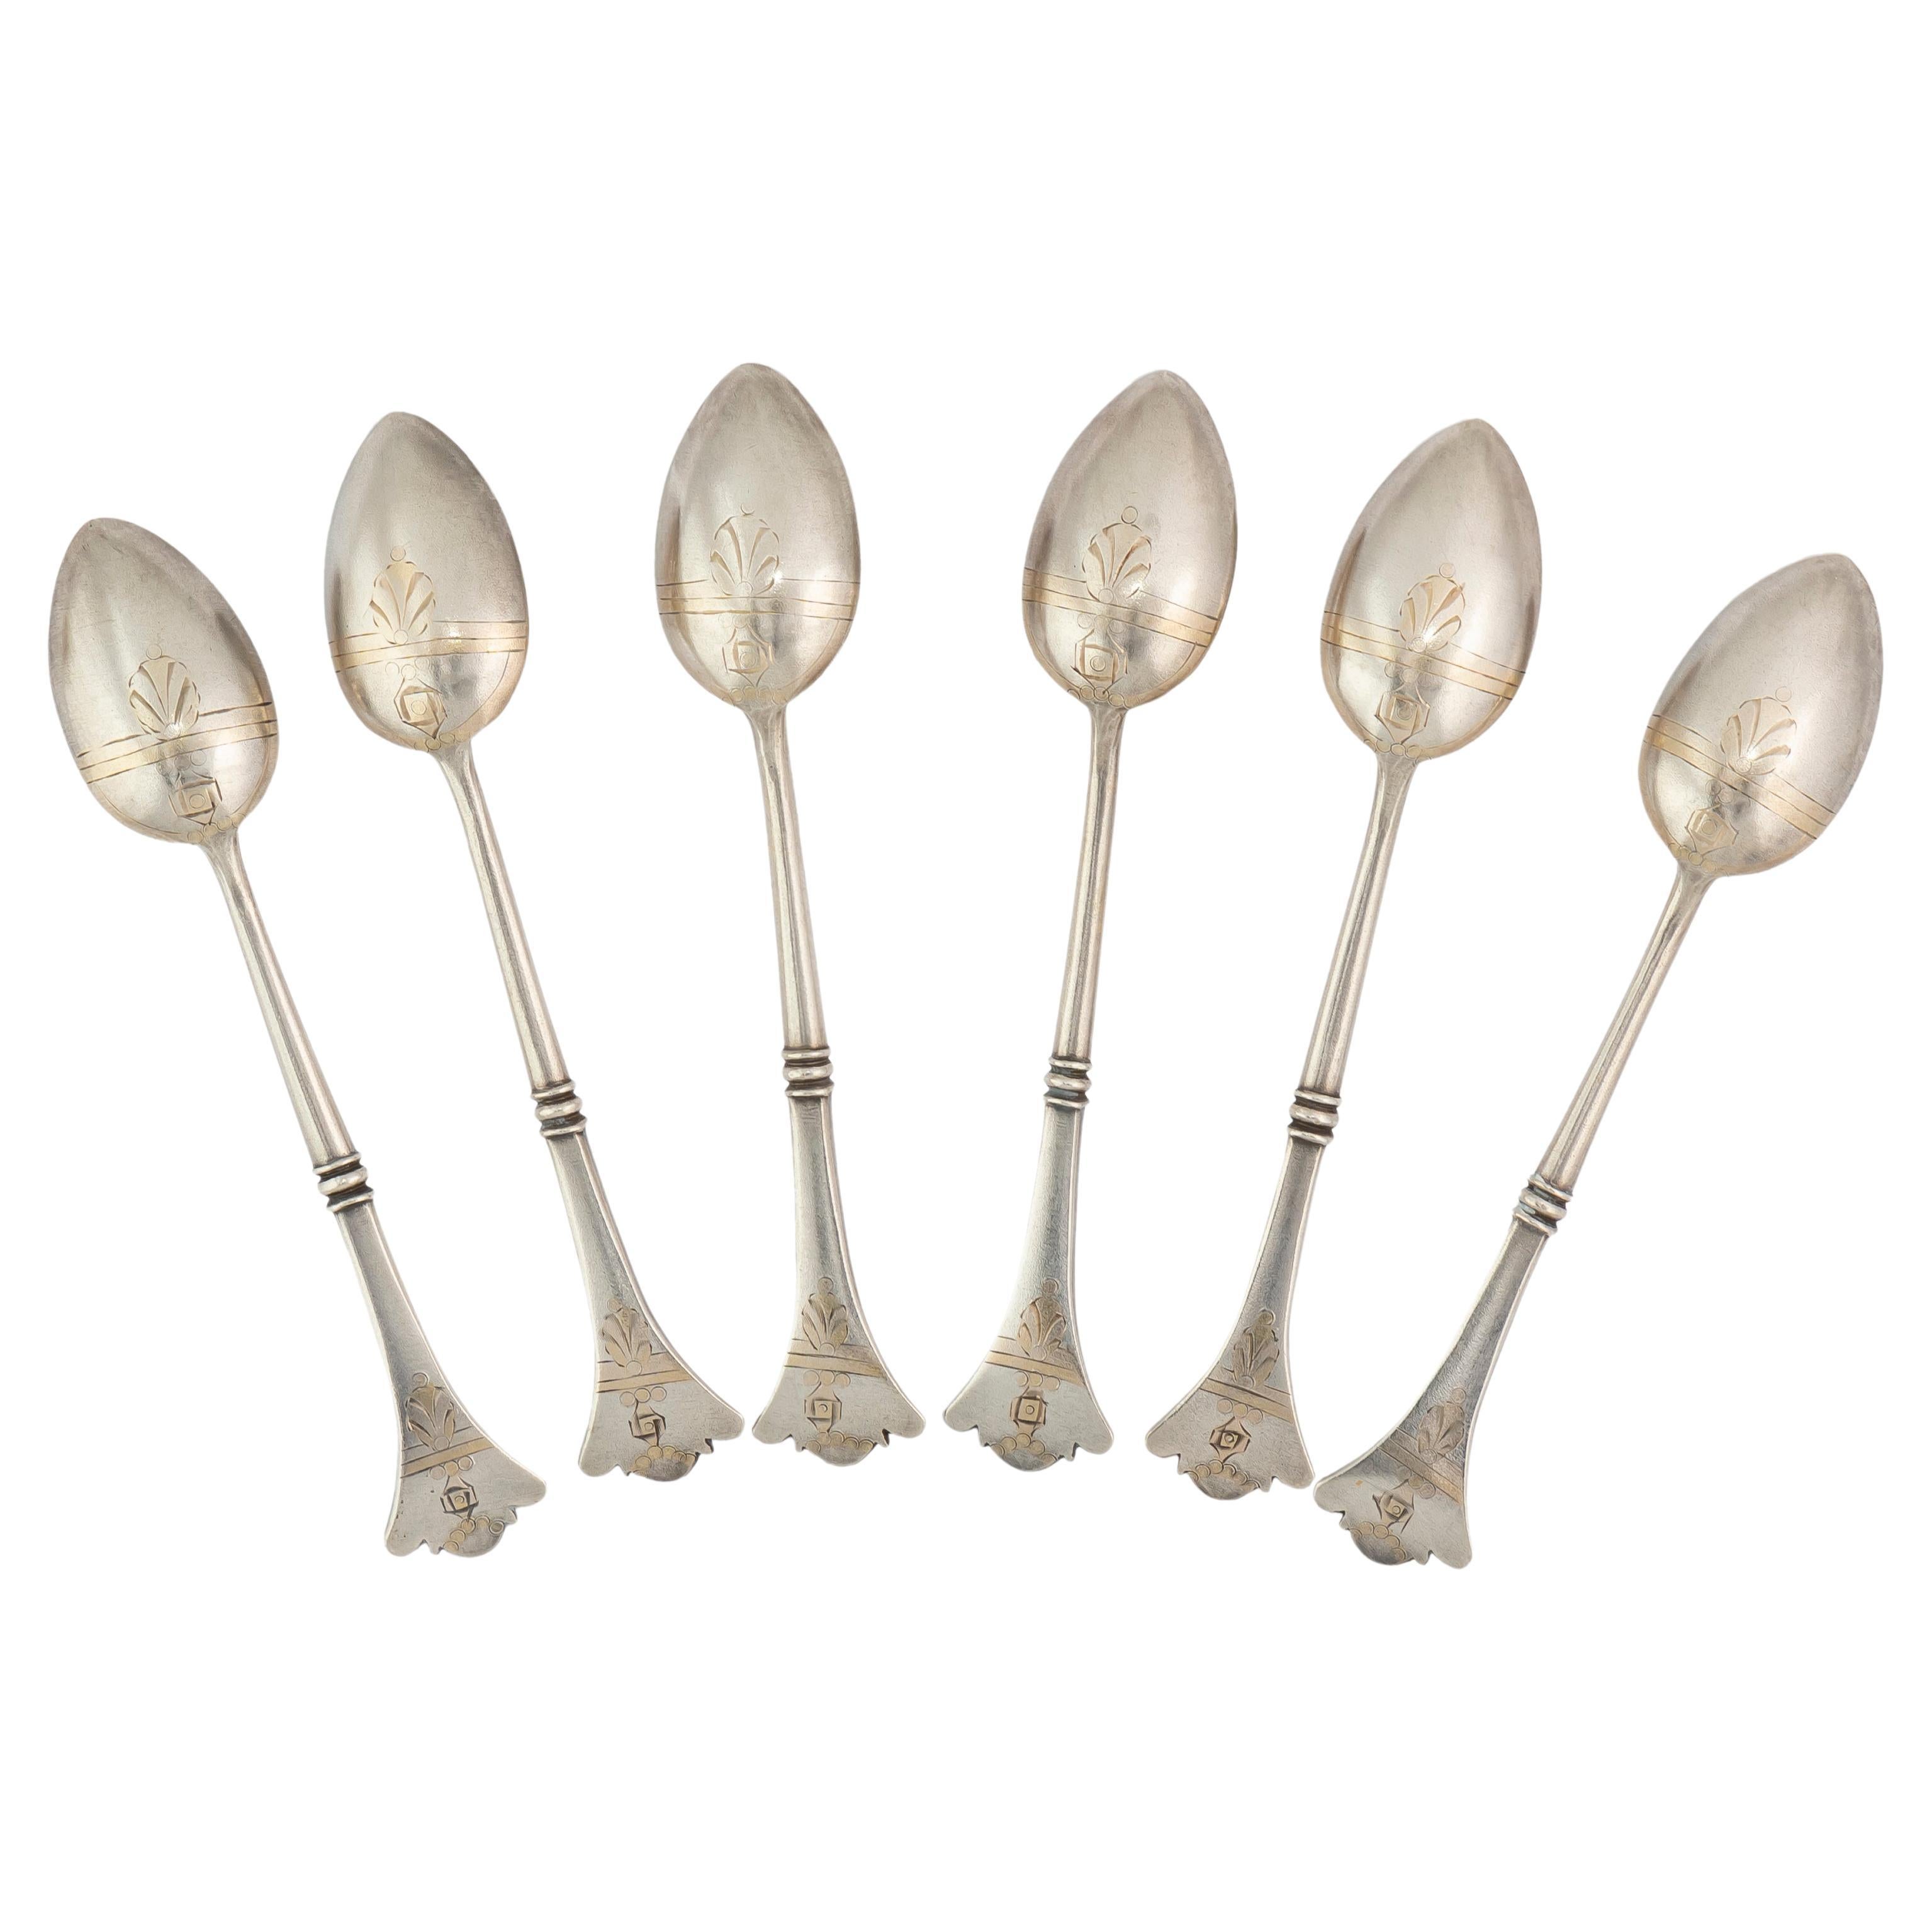 Six Russian Parcel-Gilt Silver Demi Tasse Spoons, Moscow, circa 1900